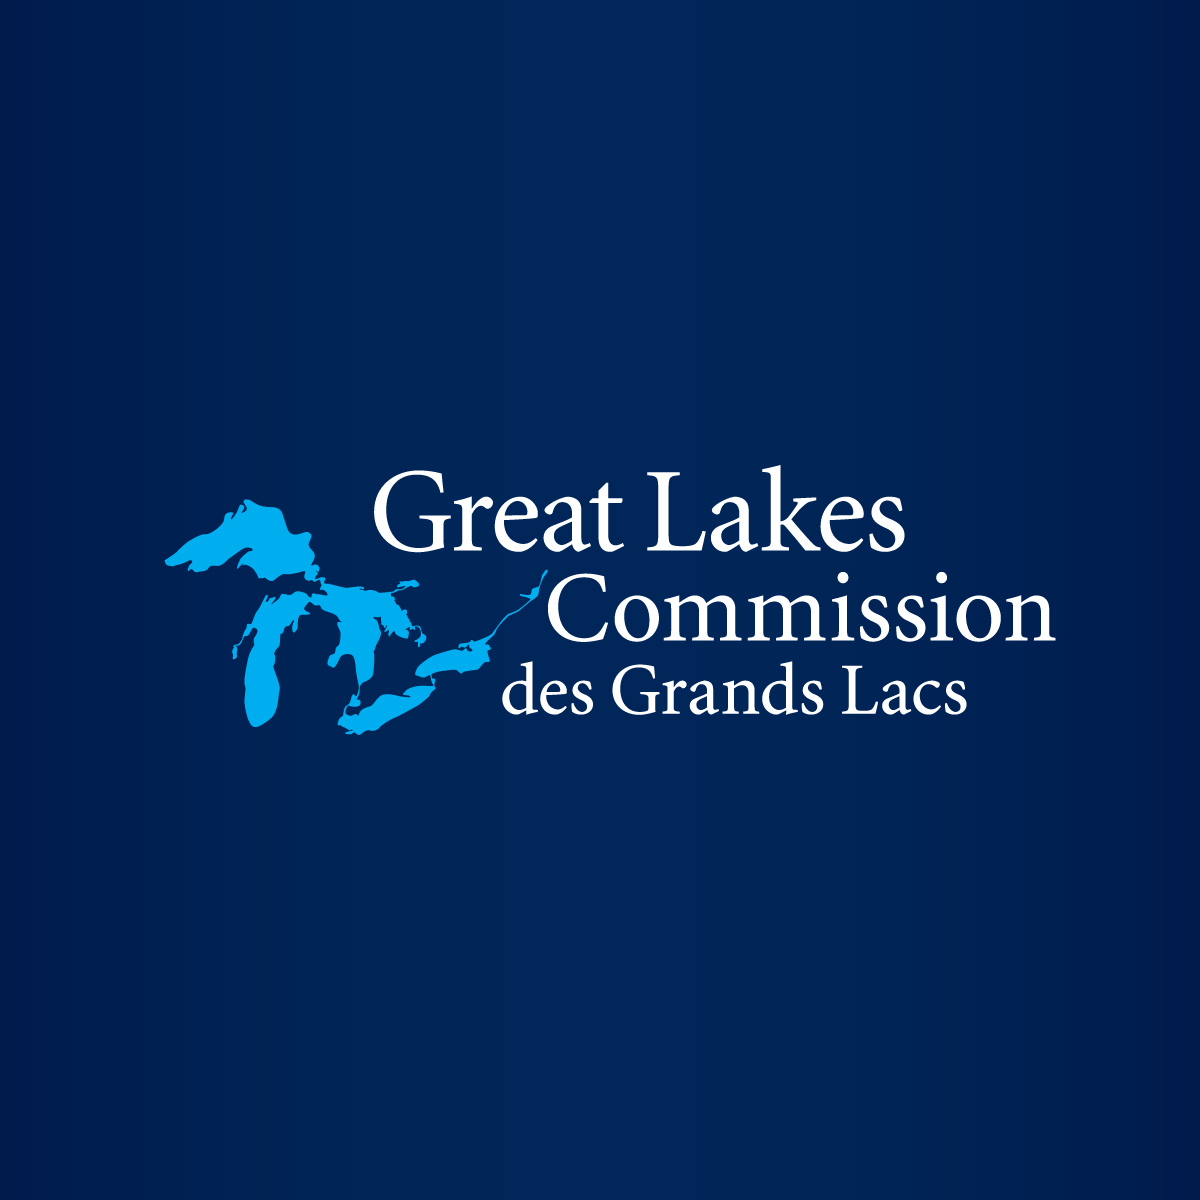 New administrator of Great Lakes/Seaway Development Corp. shares vision